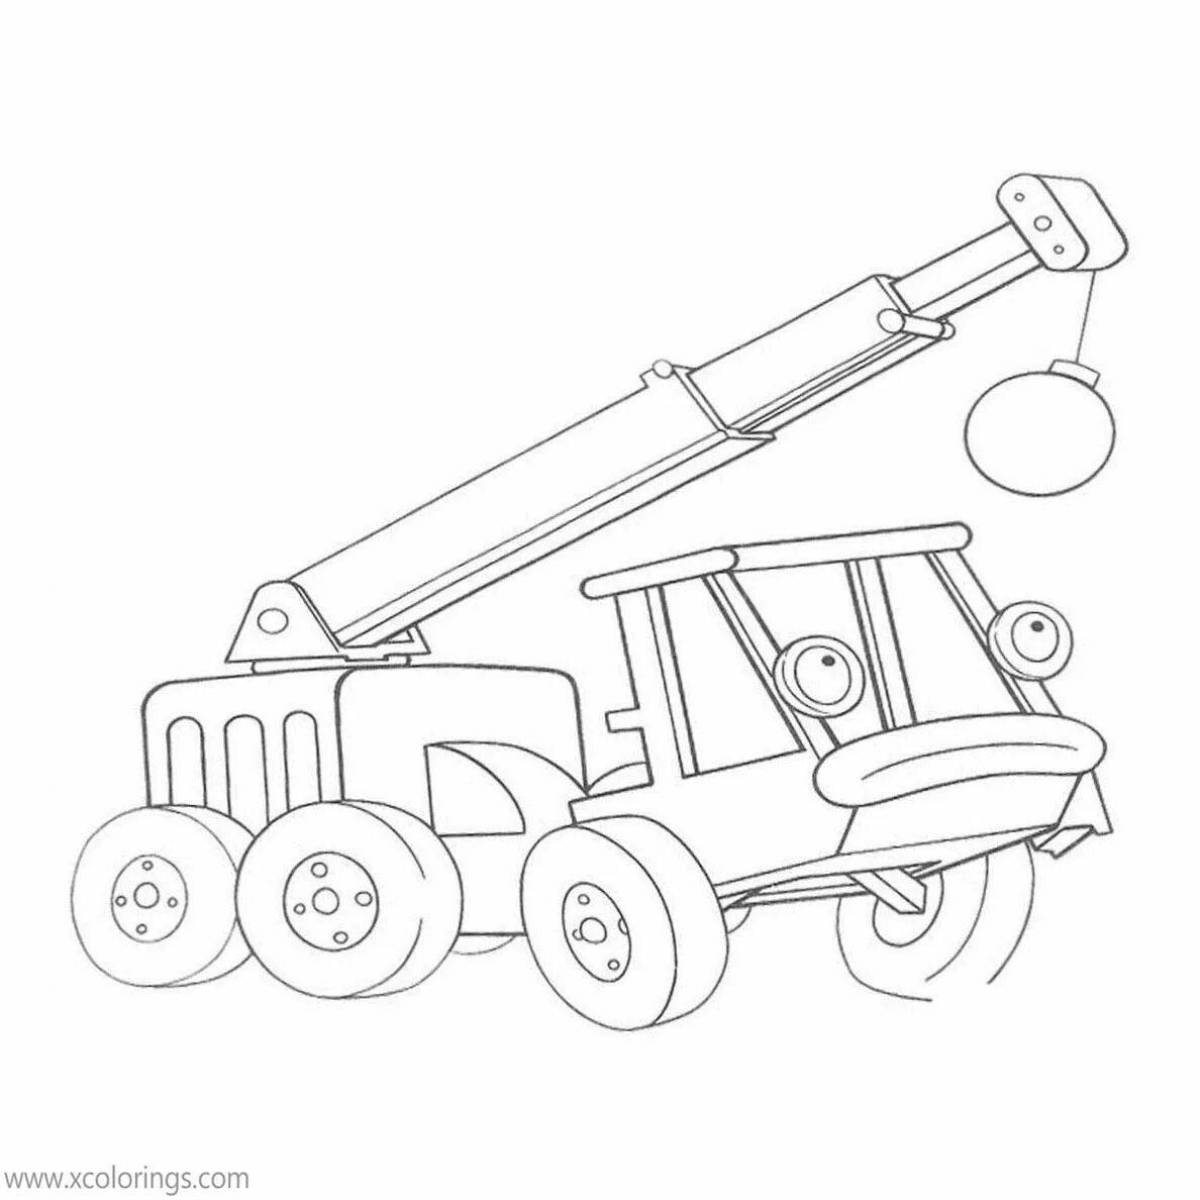 Coloring page with working machines